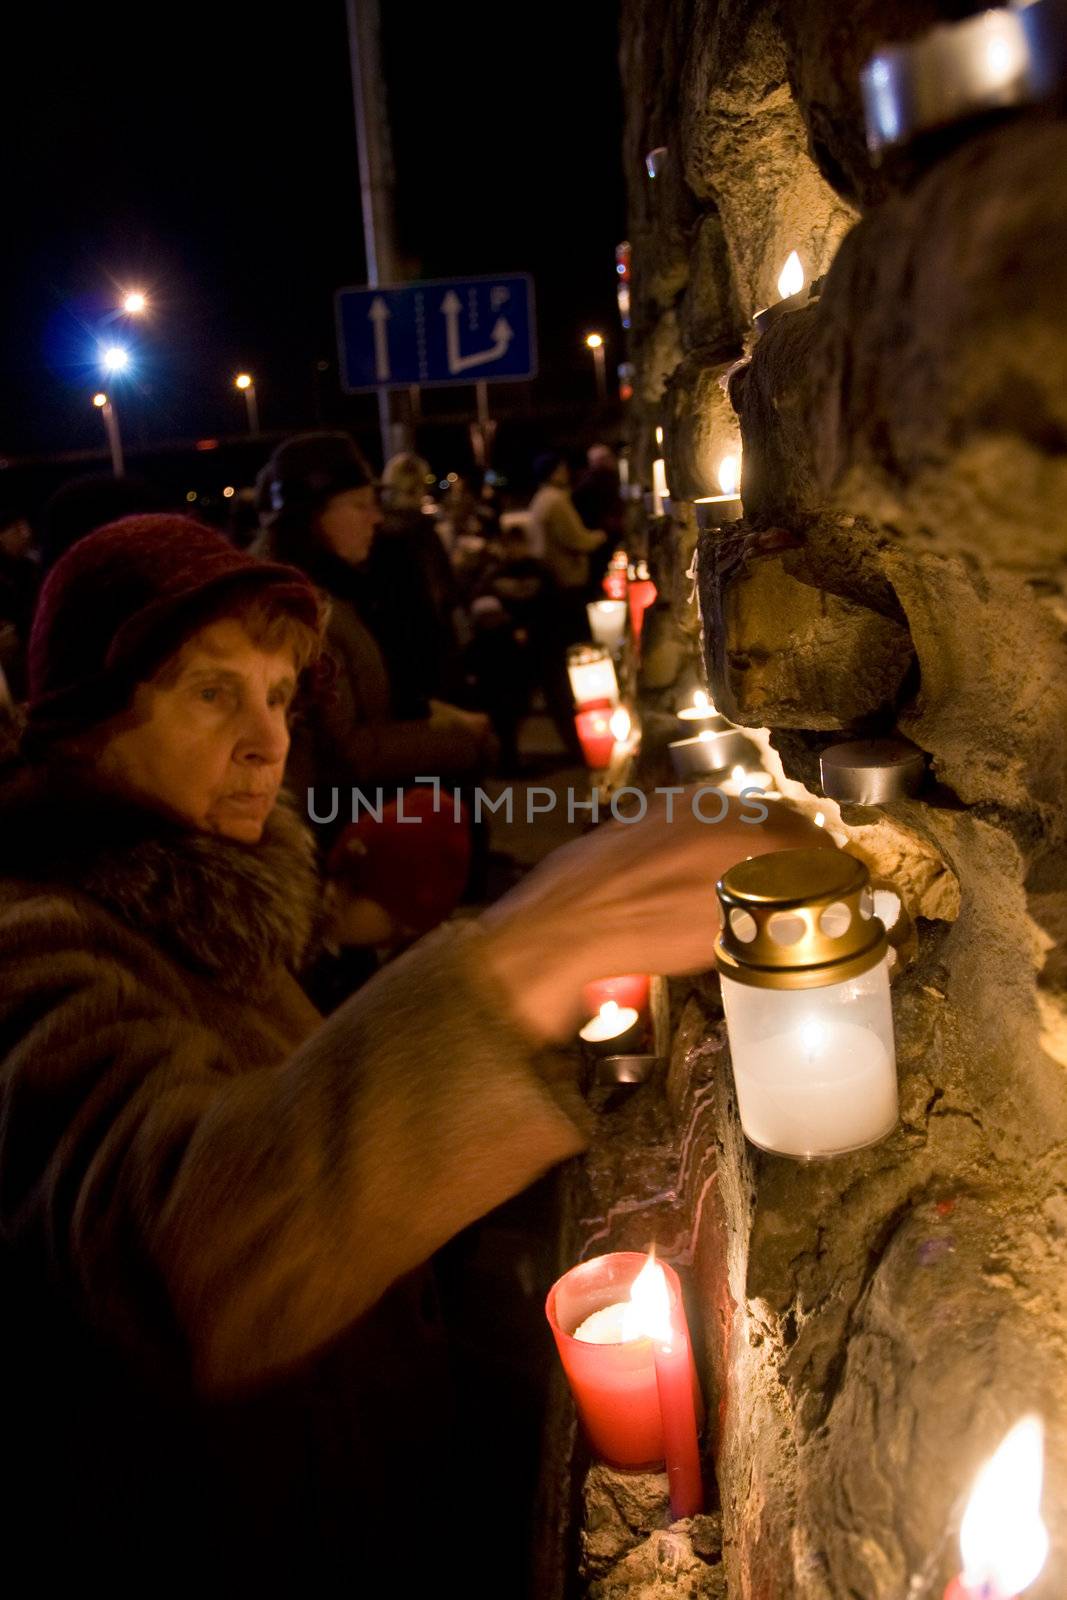 RIGA, LATVIA - NOVEMBER 11: Soldiers Memorial Day. Woman lights candle at Prezident's castle wall to commemorate victory over the Russian and German militia. This victory was important in the birth of Latvia as an independent nation. November 11, 2009 in Riga